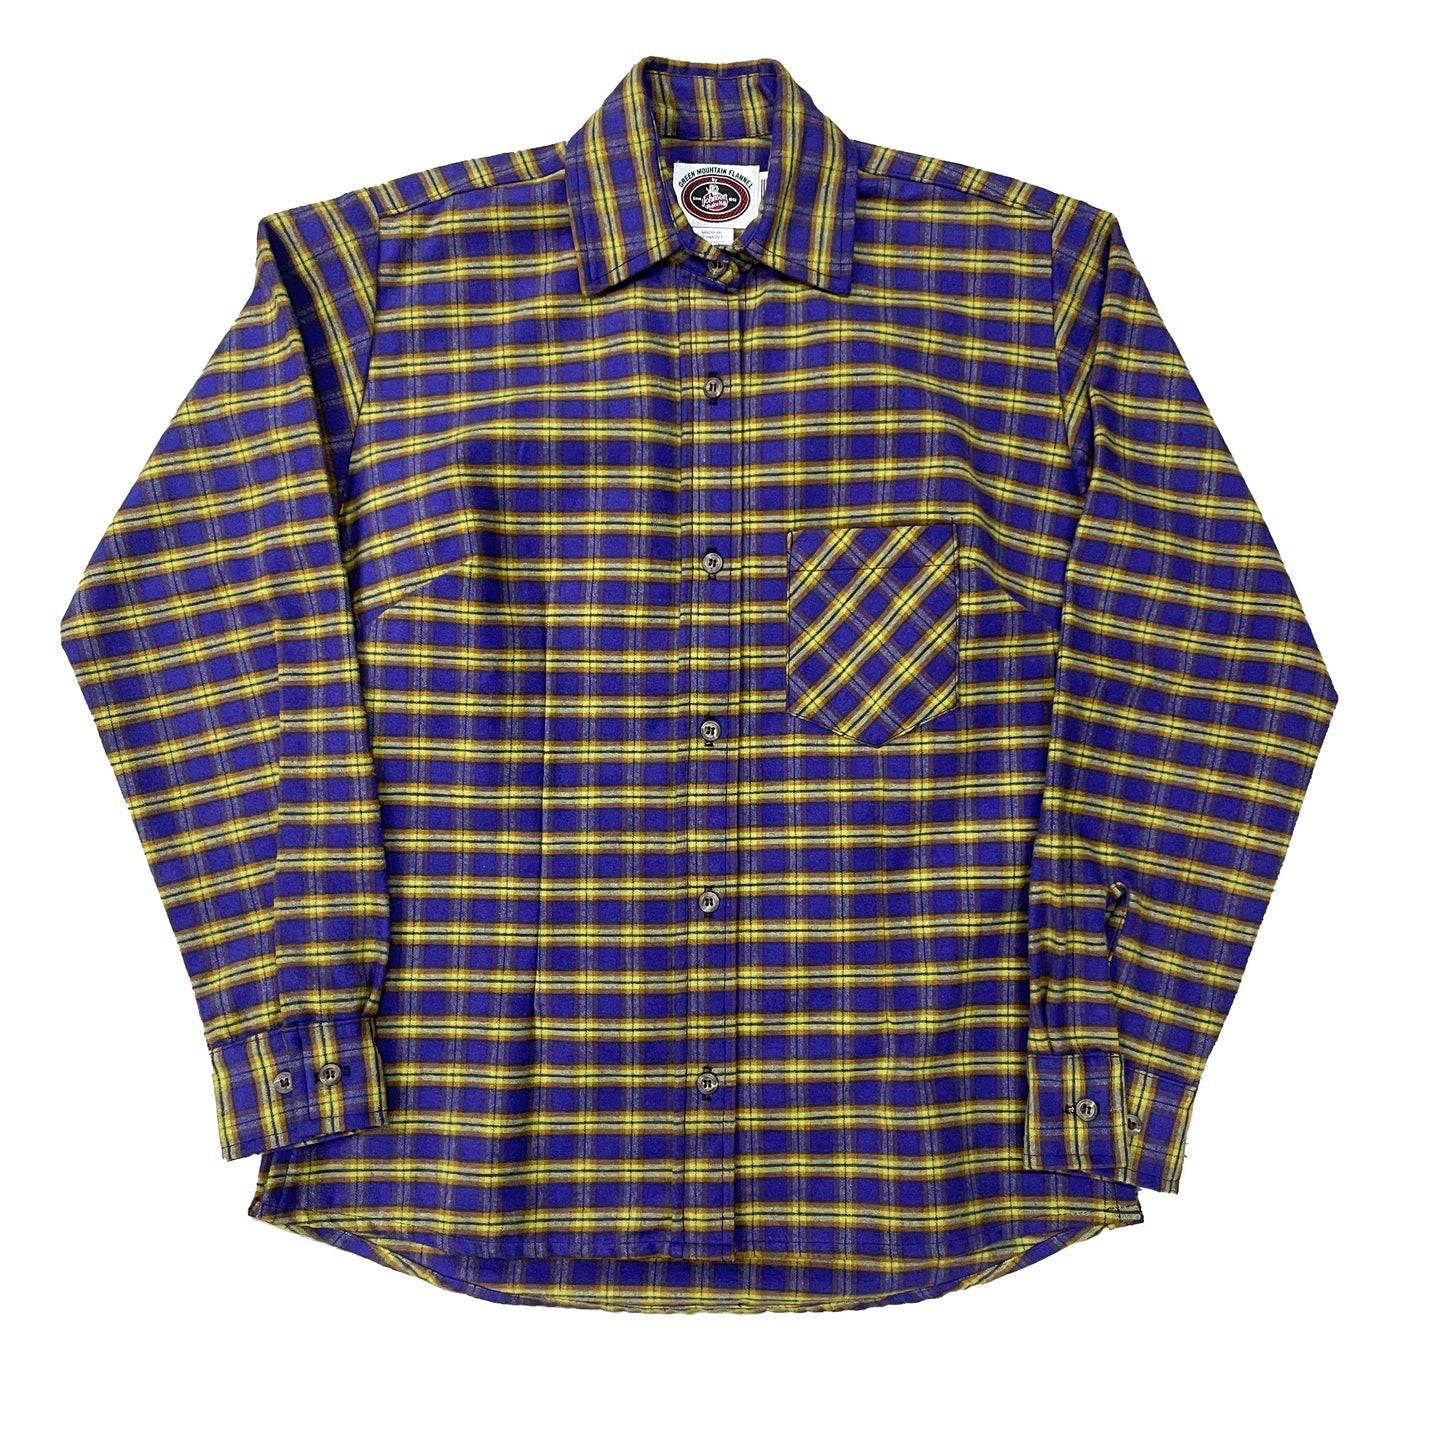 Green Mountain Women's Flannel long sleeve button down shirt with 1 chest pocket, long tail and button cuffs. Shown in purple and yellow plaid.